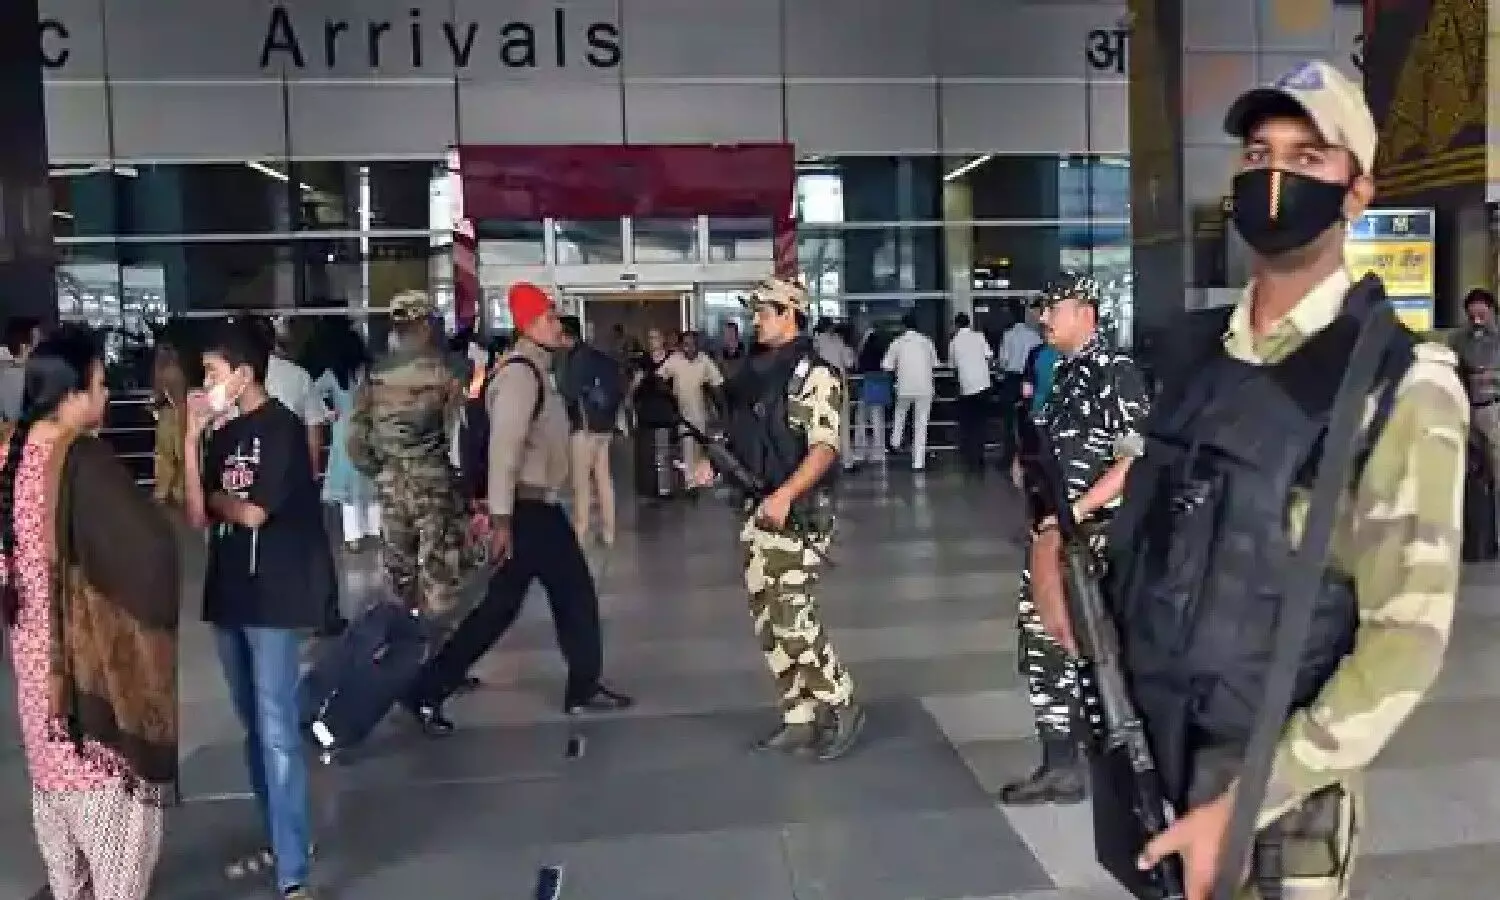 red alert has now been issued at the Bhubaneswar International Airport